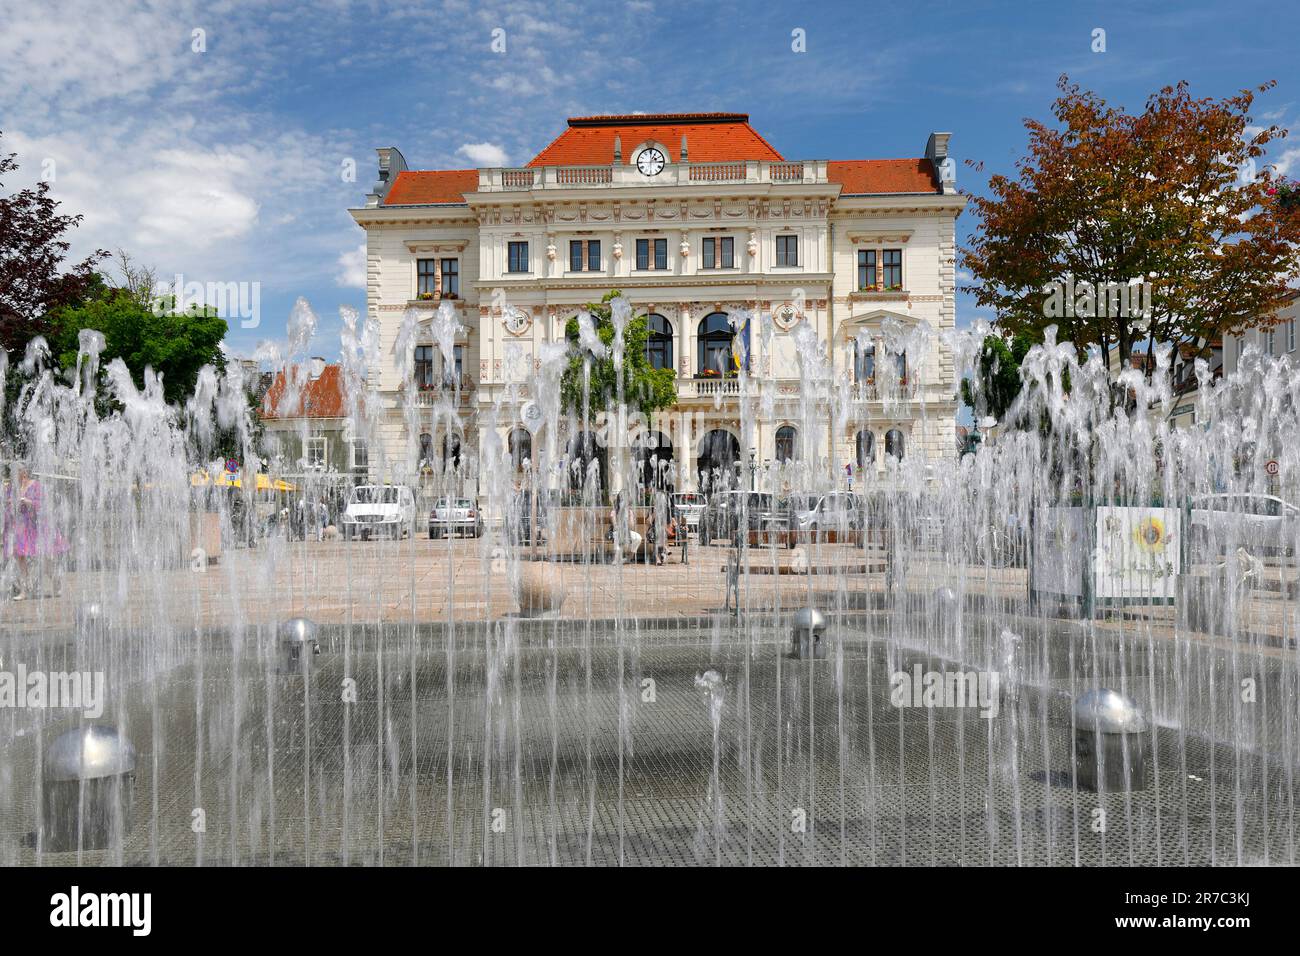 The town hall of Tulln on the Danube with the main square and trick fountain Stock Photo